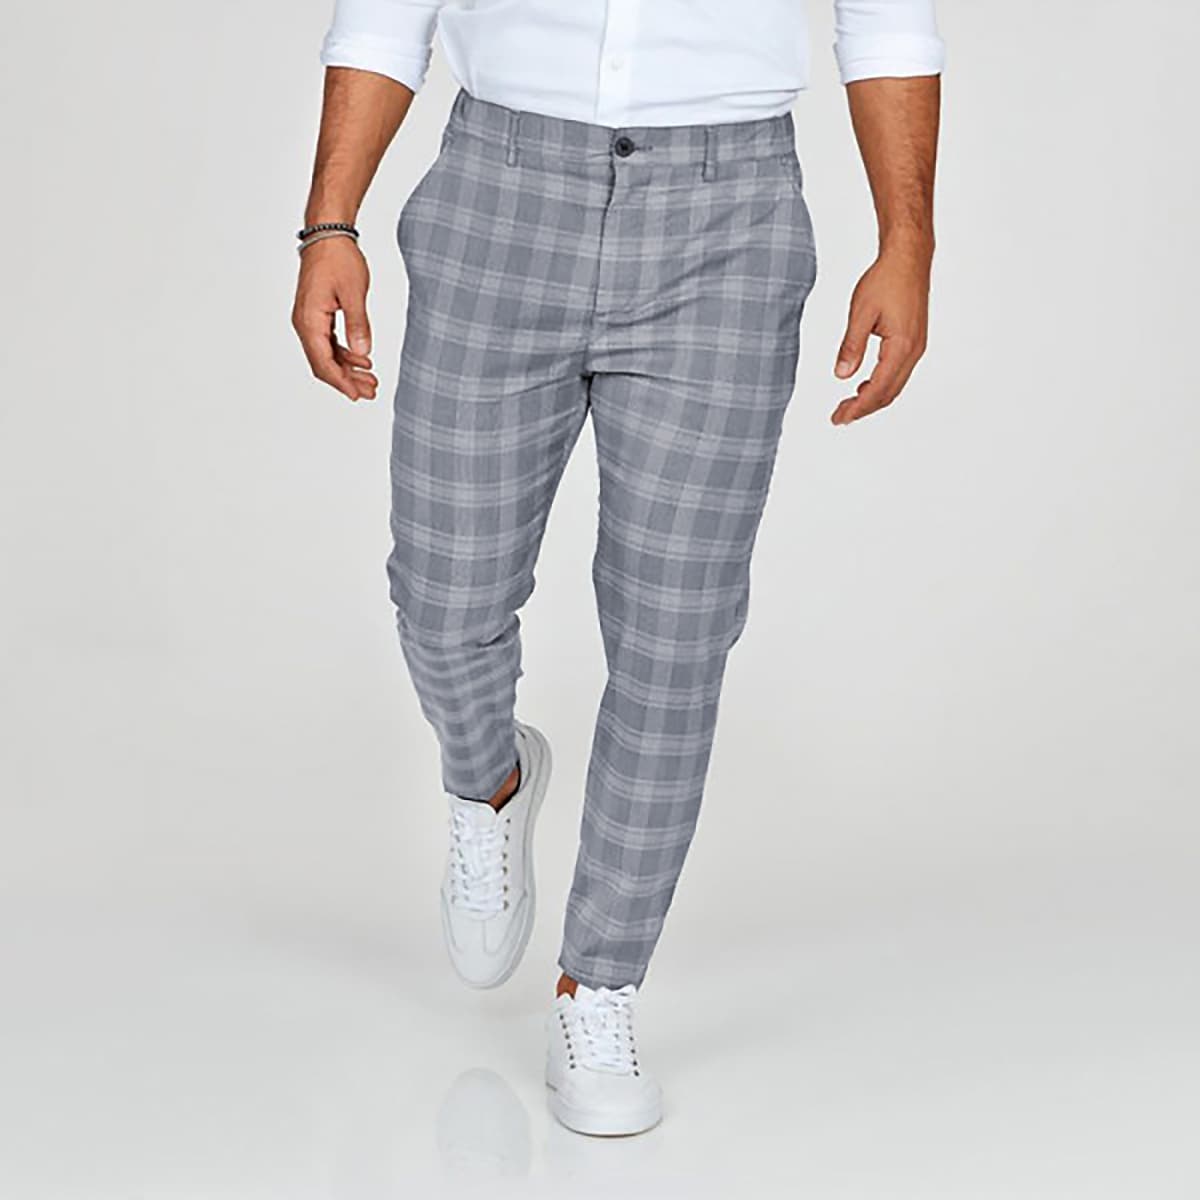 Men's Chinos Slacks Pencil Trousers Jogger Pants Plaid Checkered Lattice Soft Full Length Daily Weekend Office / Business Casual / Sporty Blue Light Green Inelastic / Fall